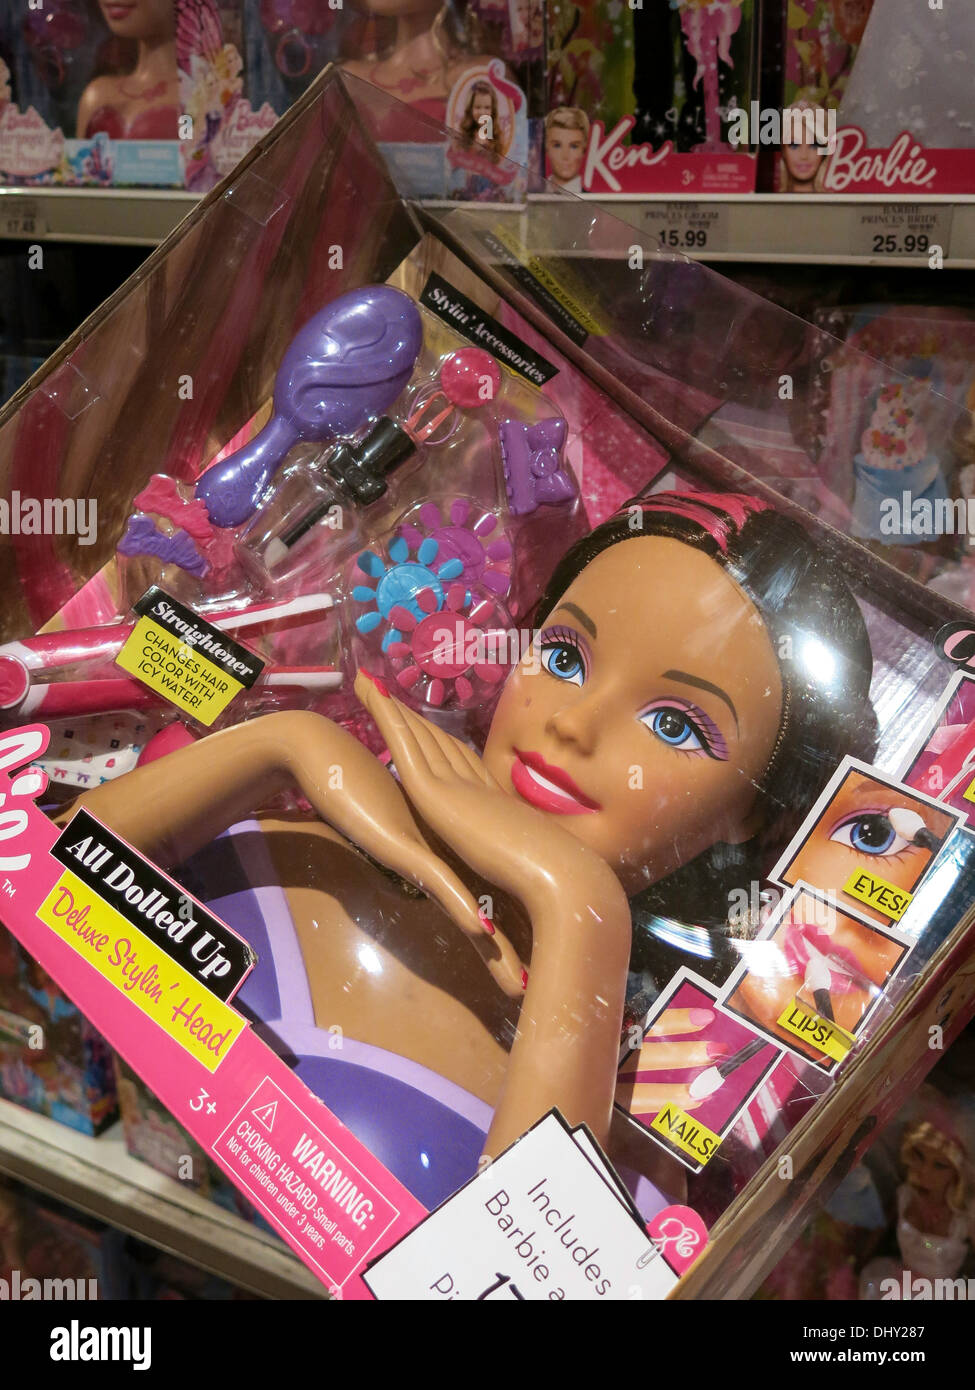 Barbie Doll Deluxe Skin-Head, Barbies Traum Haus Display, Toys R uns  speichern Interieur, Times Square, New York Stockfotografie - Alamy